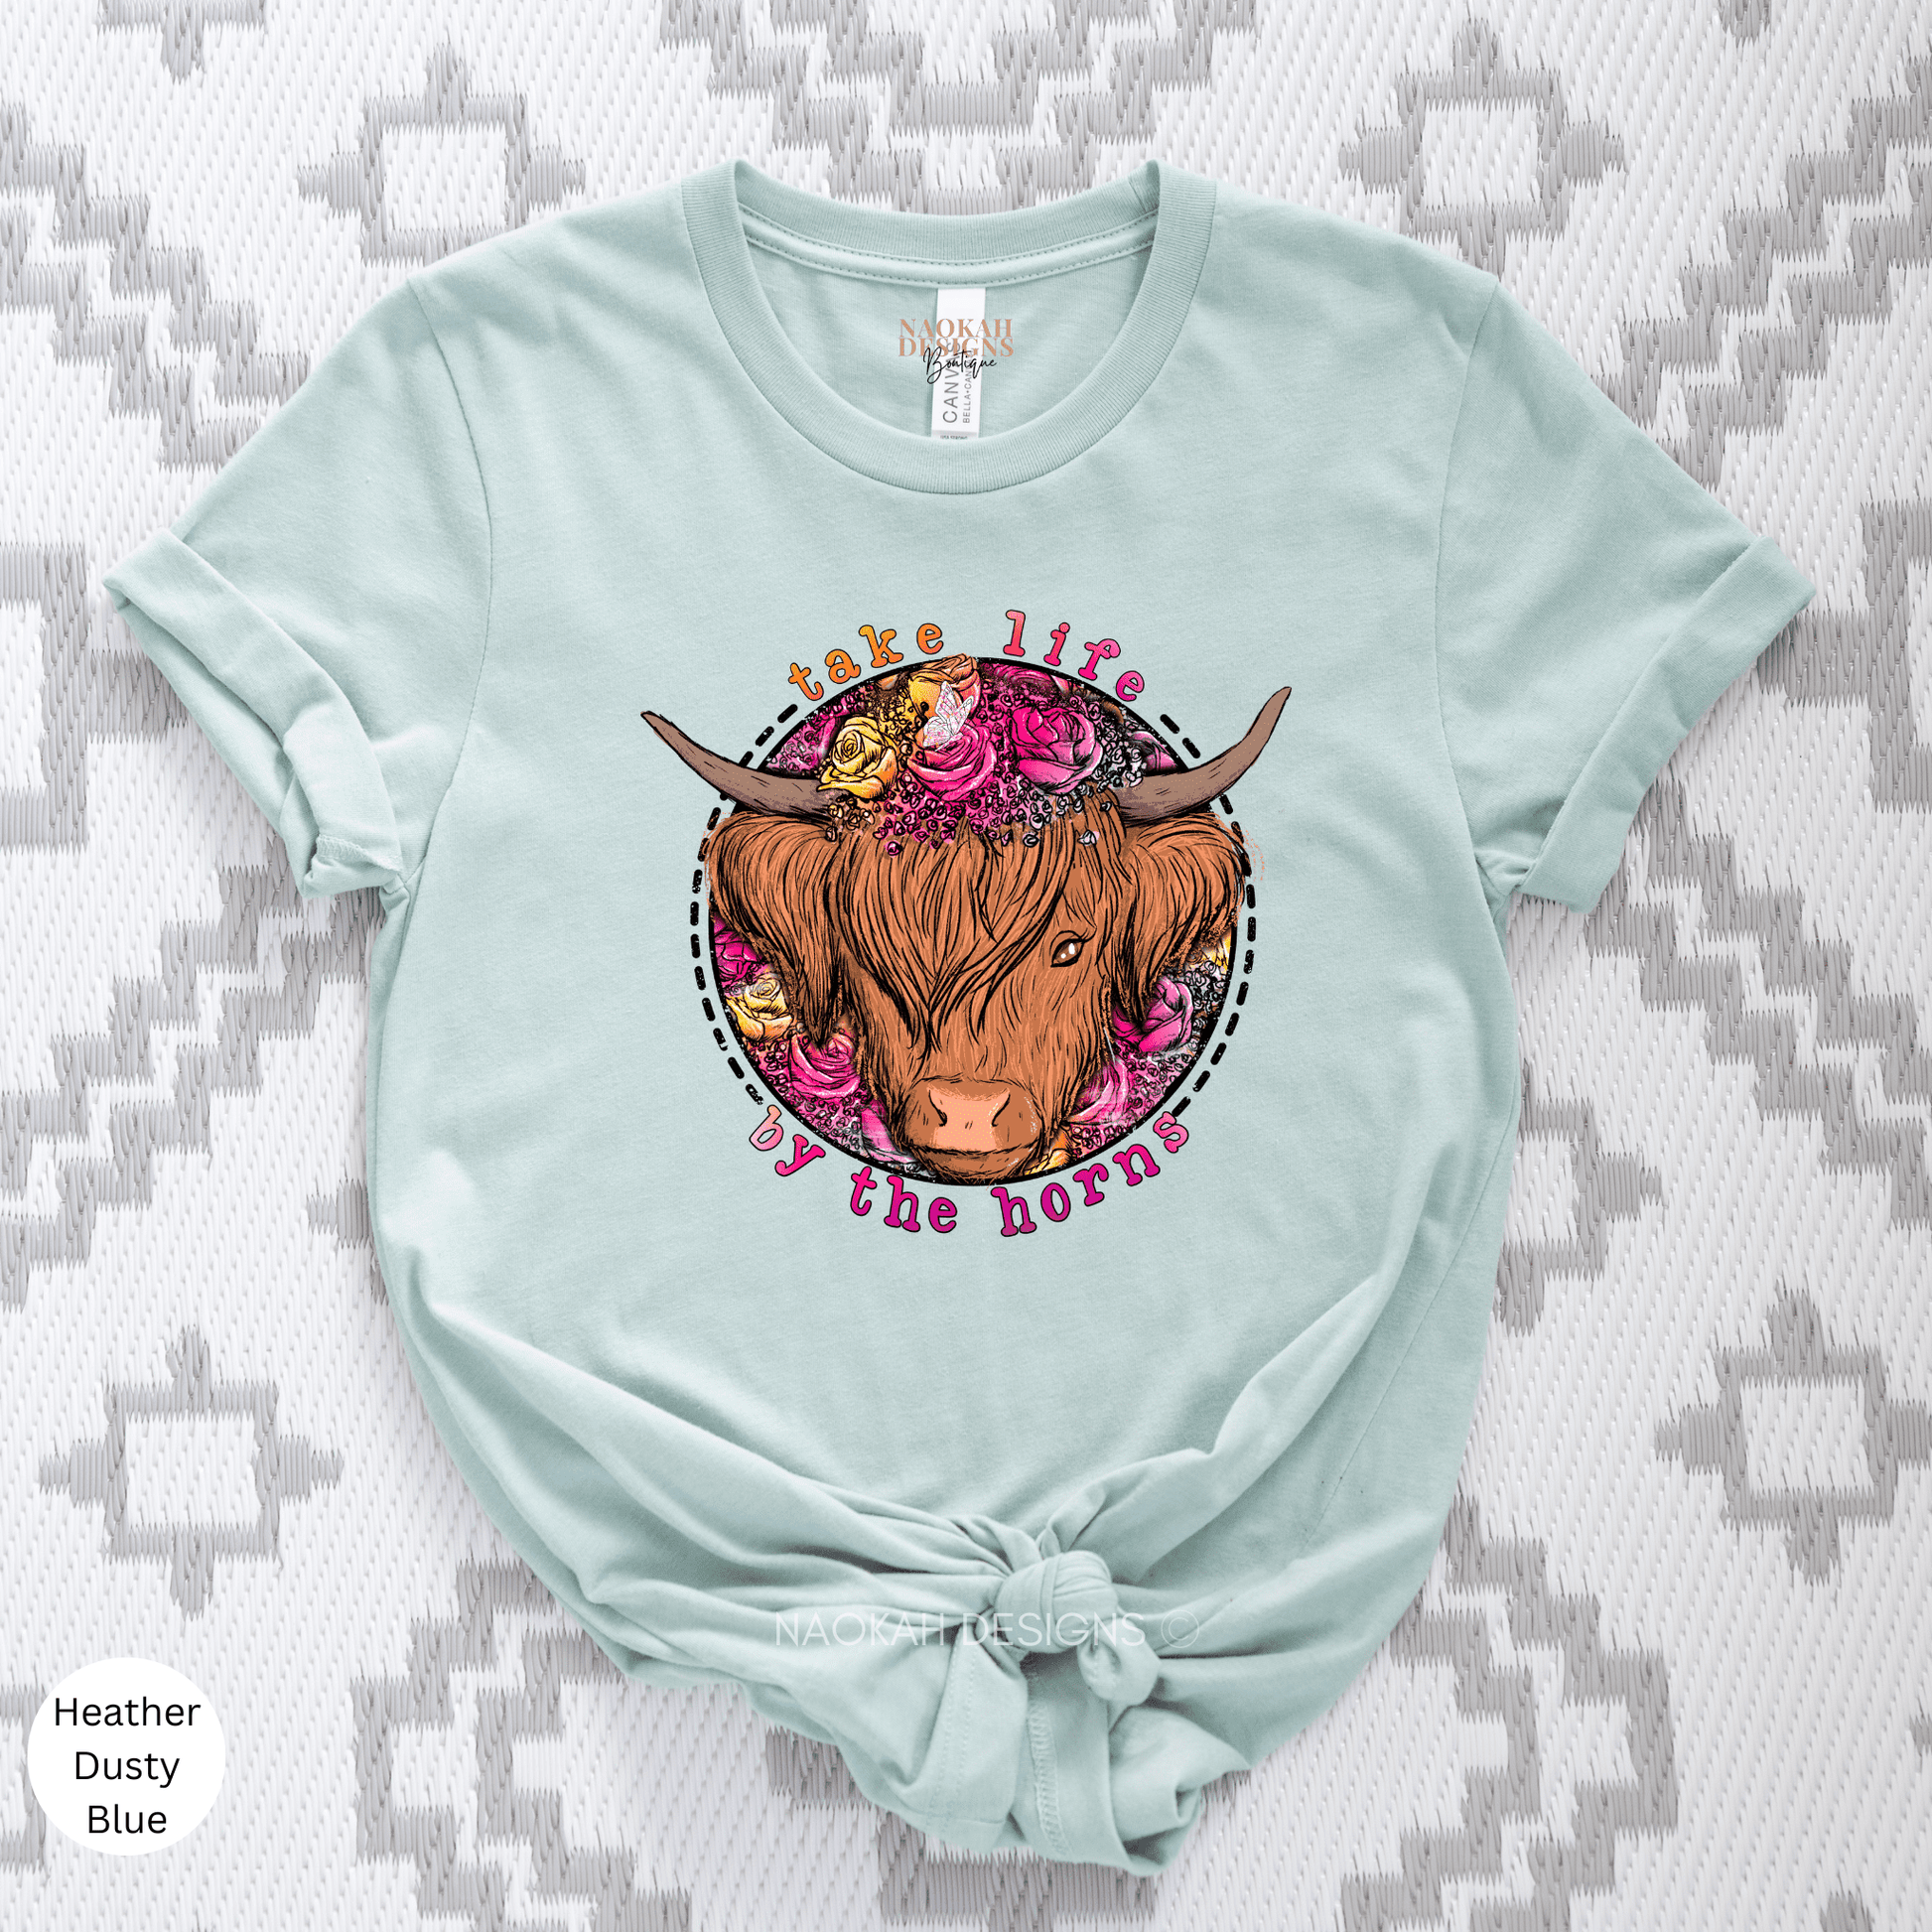 Take Life By The Horns shirt, cow flowers shirt, cowboy shirt, cowgirl shirt, rodeo shirt, bull horns shirt, western shirt, grab life by the horns shirt